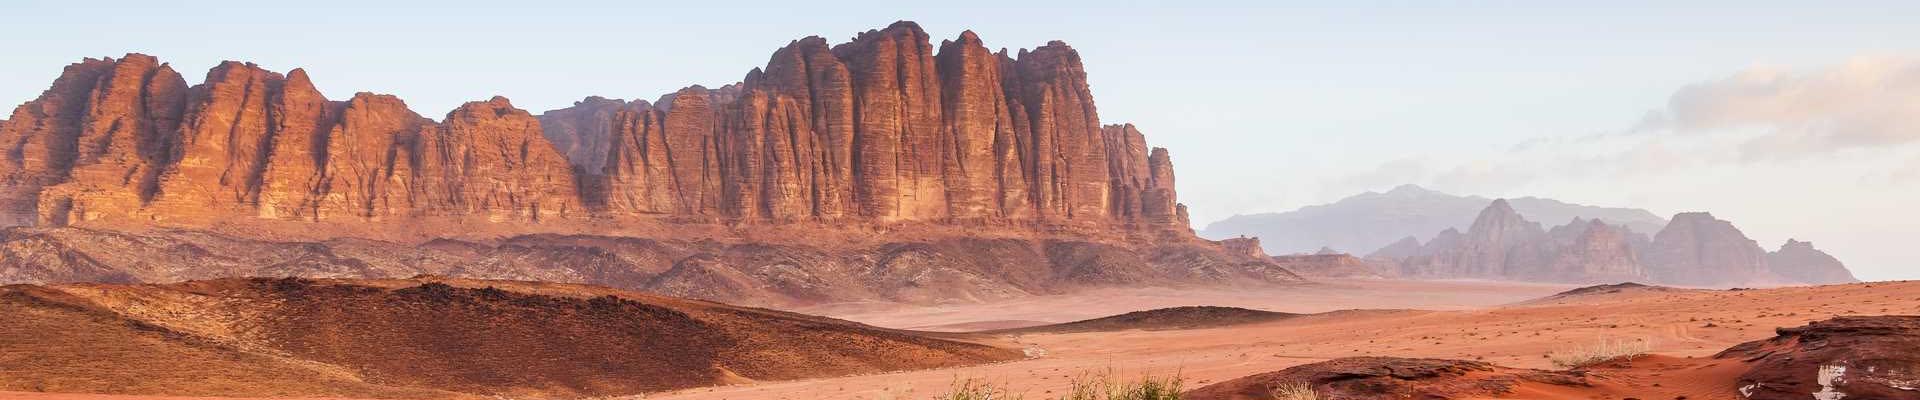 Create Lasting Memories with Jordan Family Holidays – A Perfect Blend of Adventure and Culture